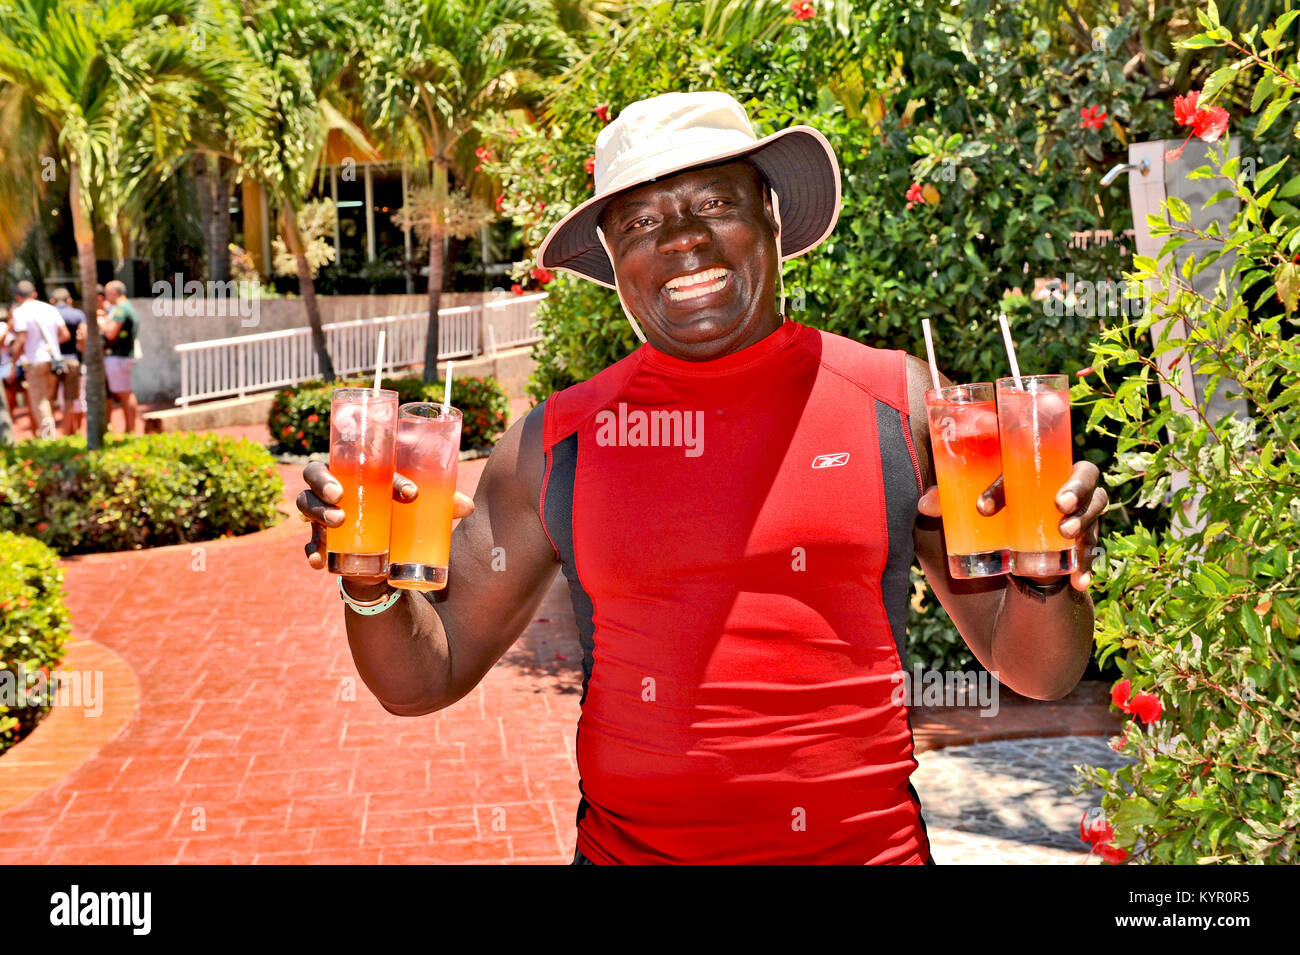 HAVANA, CUBA, MAY 5, 2009. A smiling man in a diving suit holding four fruit coctails in his hands, in Havana, Cuba, on May 5th, 2009. Stock Photo